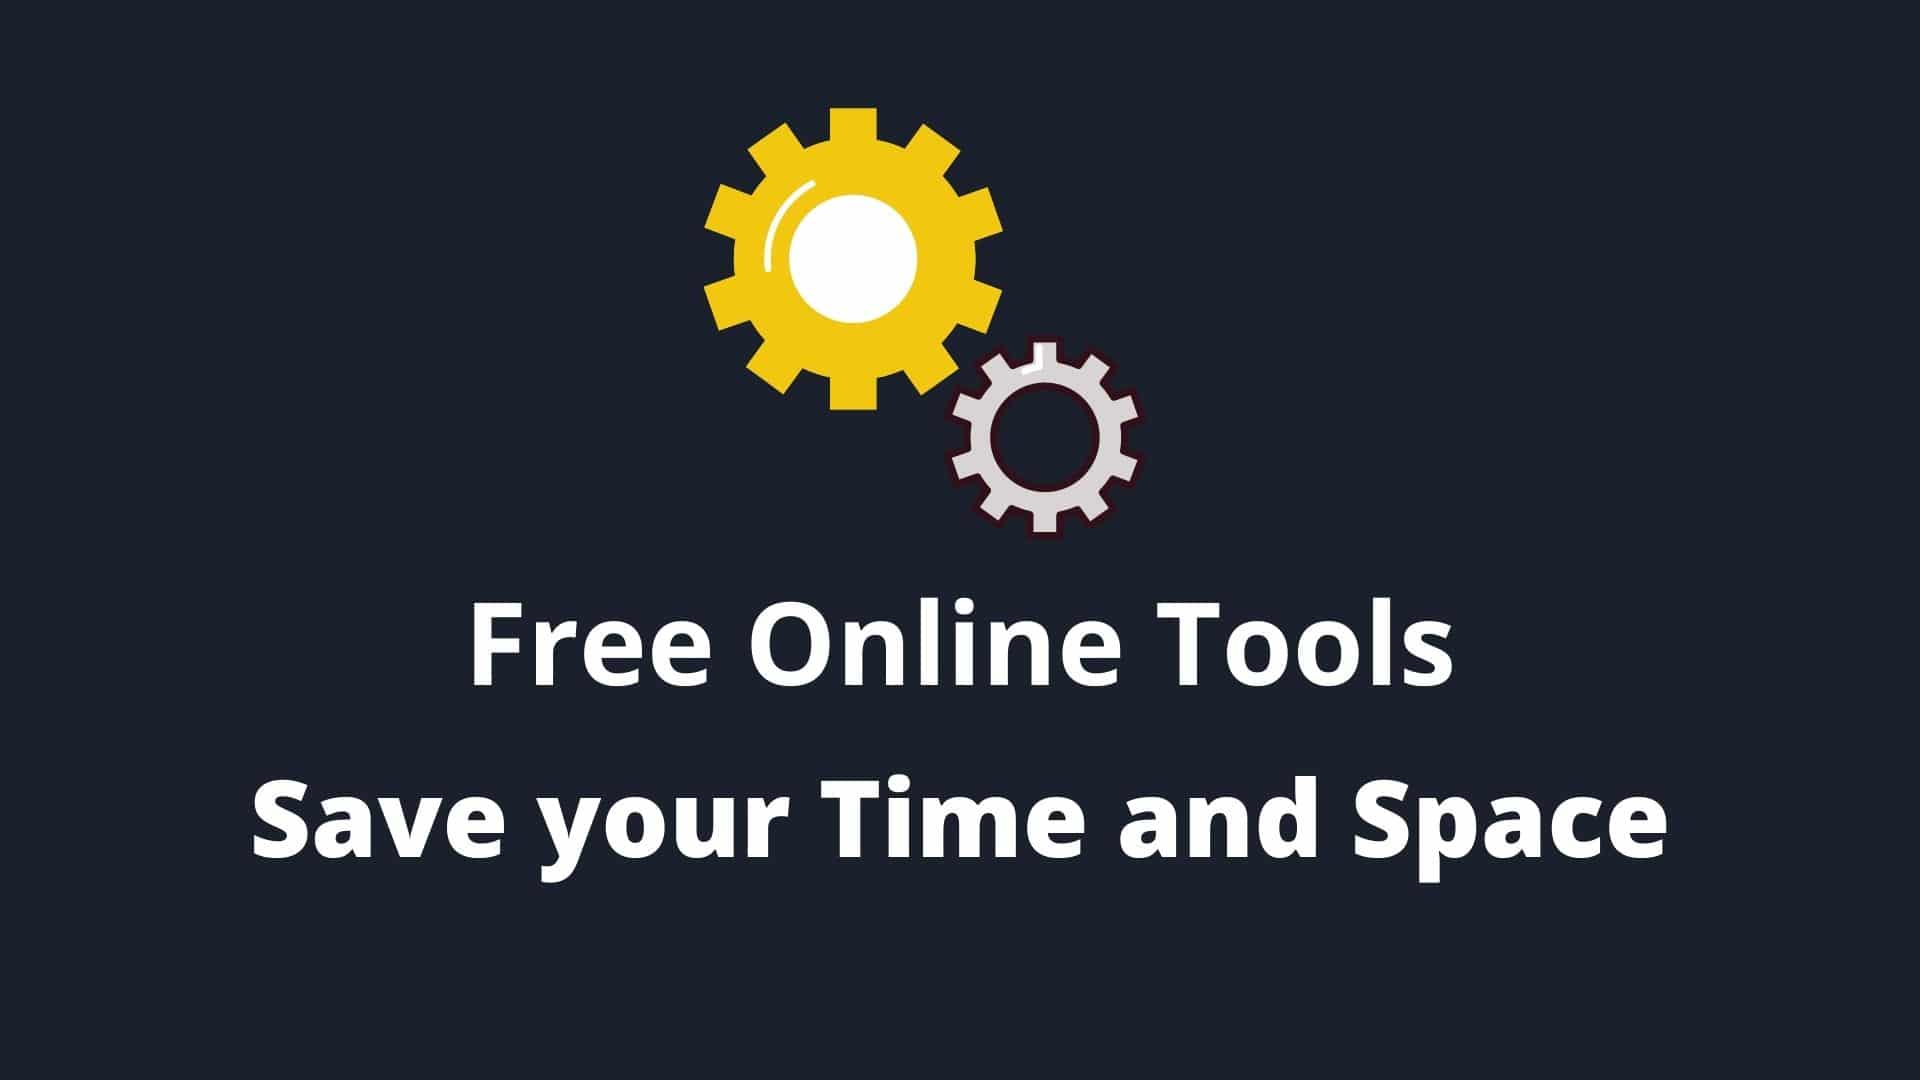 3 Free Online Tools everyone should know about